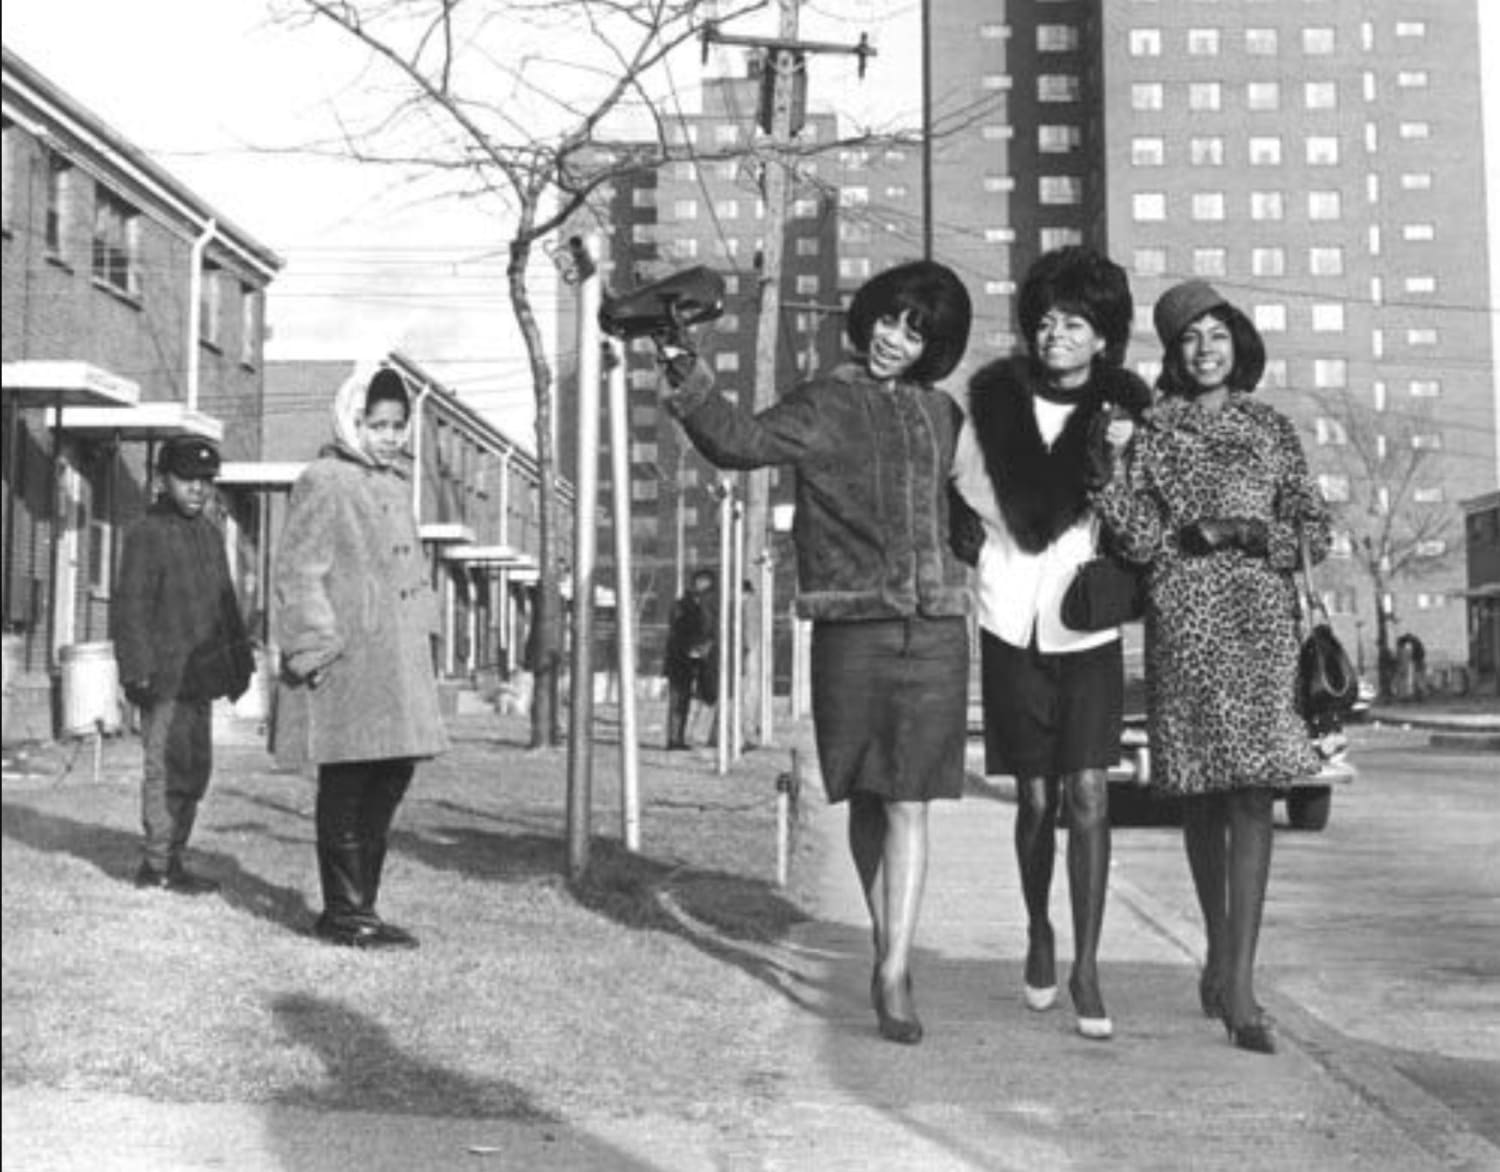 Mary Wilson, Florence Ballard and Diana Ross of The Supremes take a stroll through Detroit's Brewster Douglas Projects where they grew up. Mid 1960's [1364 - 1746]